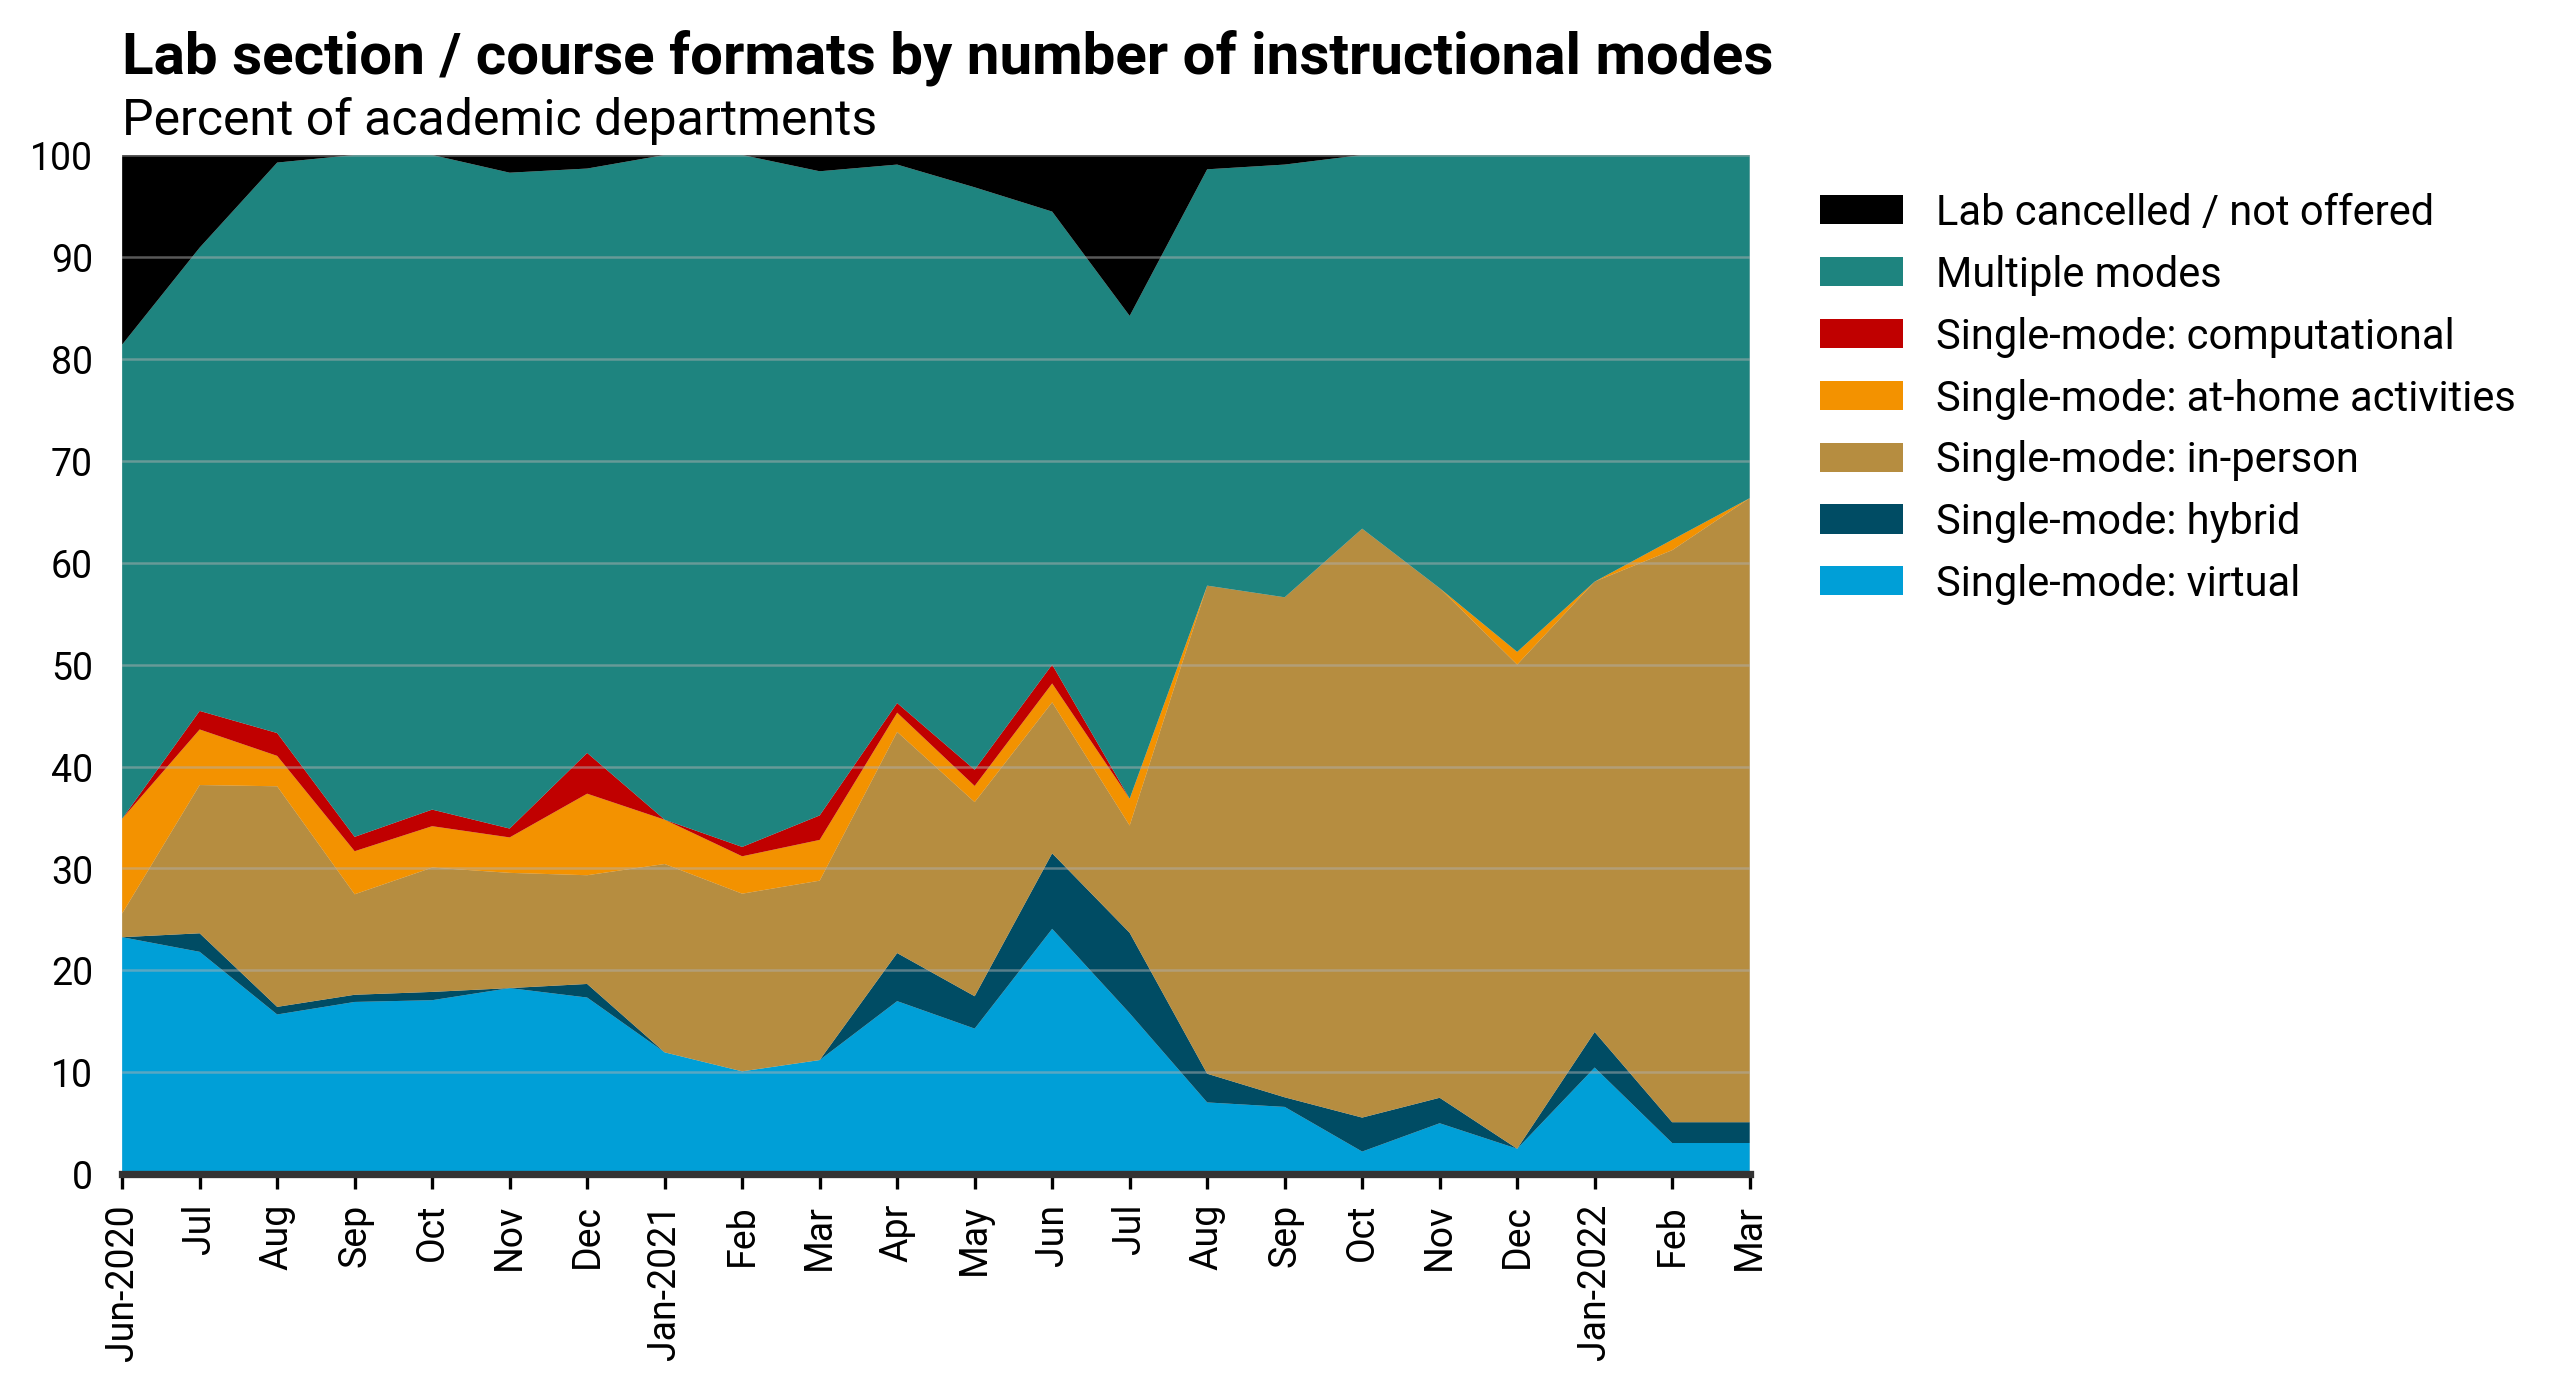 DB_2022-004 chart 04: Lab section / course formats by number of instructional modes (Credit: AGI; data from AGI's Geoscience COVID-19 Survey)